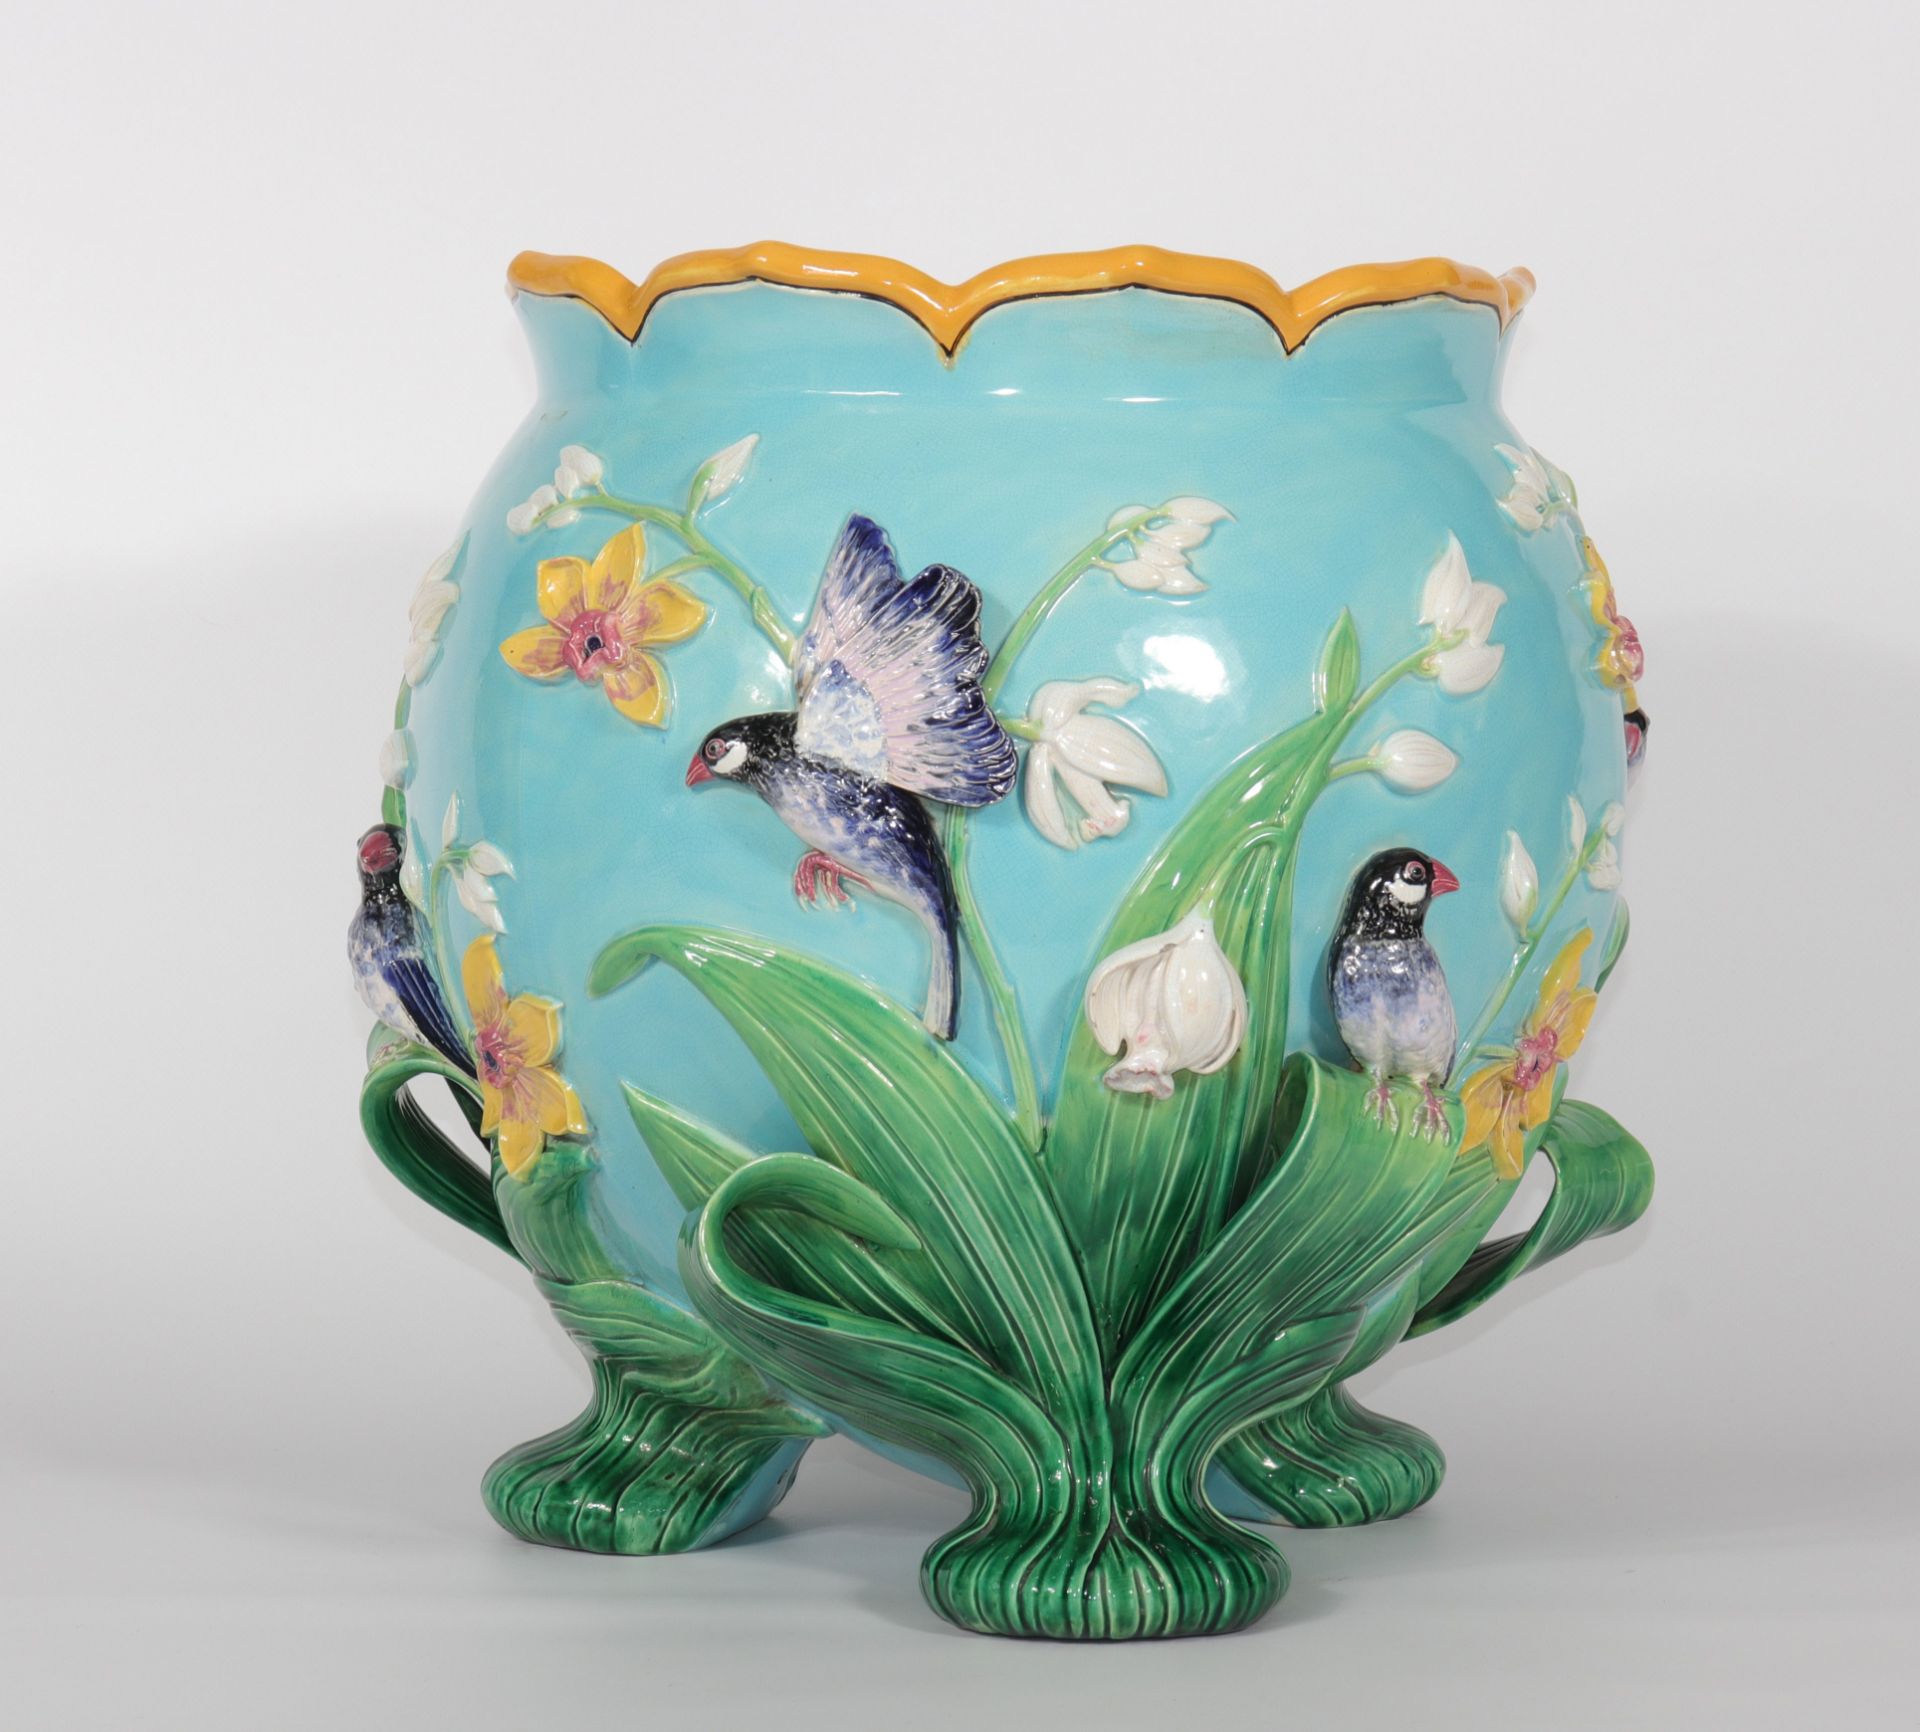 George Jones very large majolica planter decorated with birds and flowers - Image 3 of 6